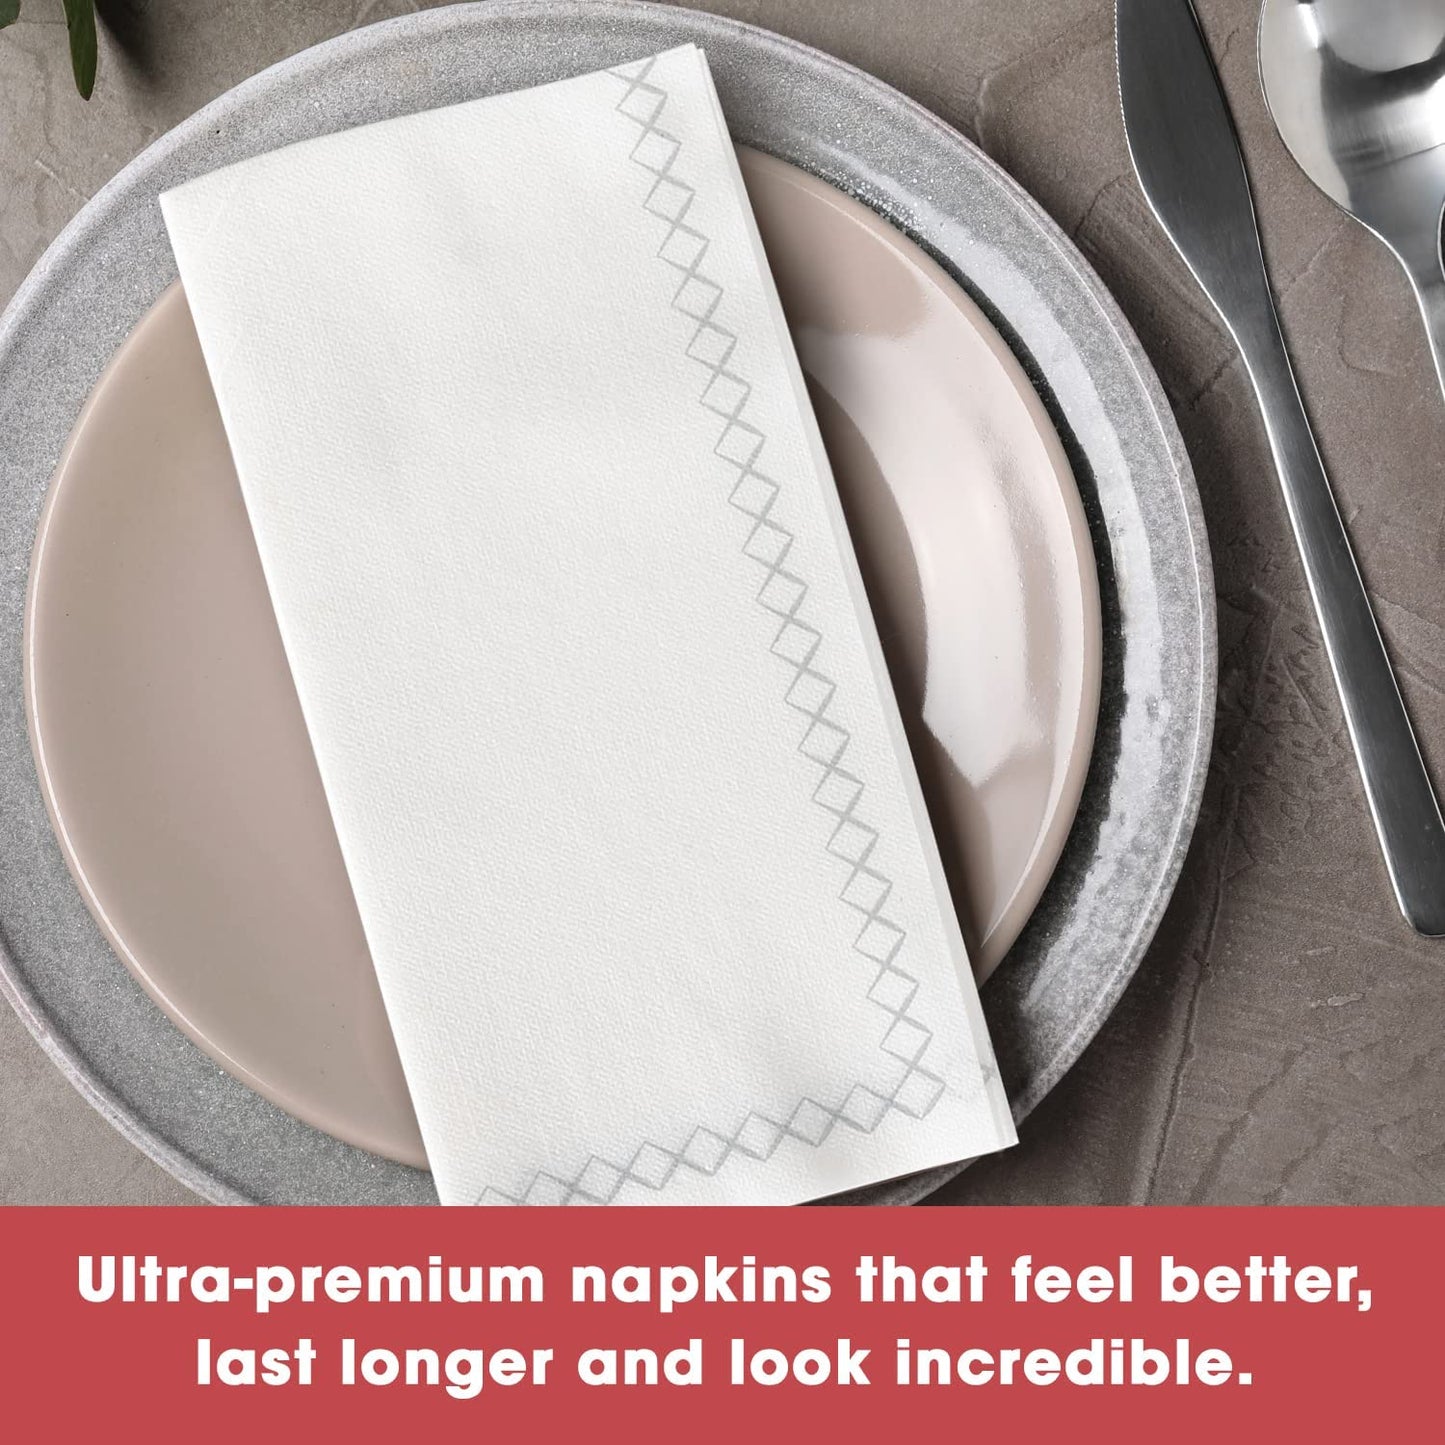 Gold Fancy Paper Napkins - Perfect Disposable Guest Hand Towels for Bathrooms (8.5" x 4", Silver 100 Pack)